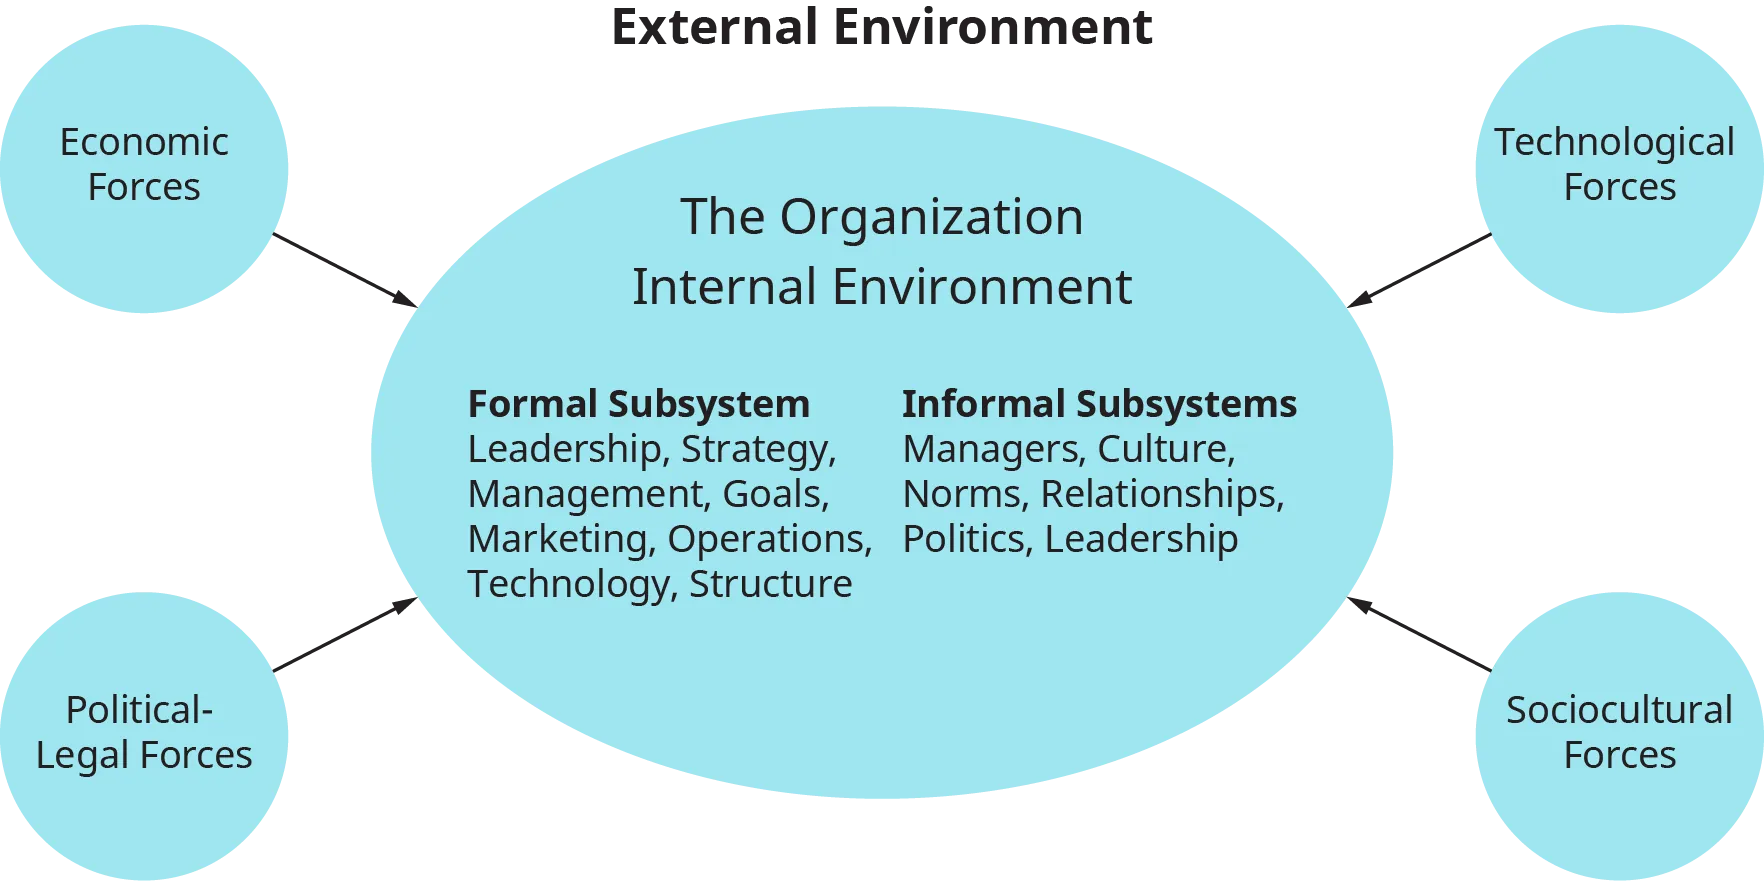 A diagram shows the subsystems of the internal environment of an organization and the external forces affecting it.